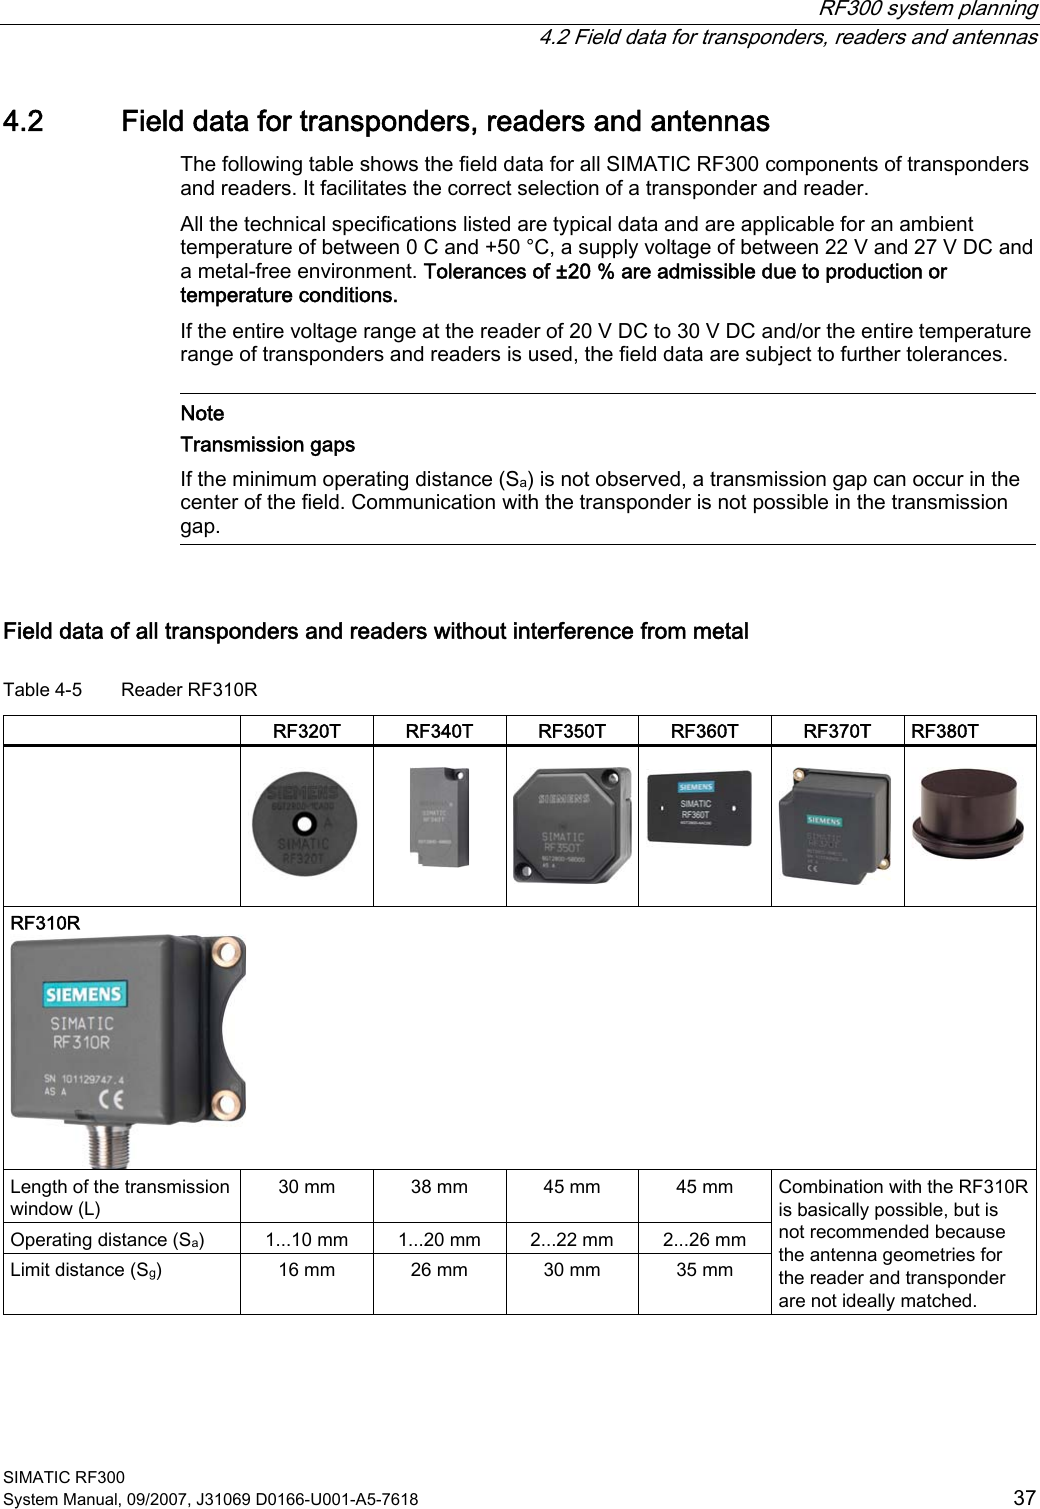  RF300 system planning   4.2 Field data for transponders, readers and antennas SIMATIC RF300 System Manual, 09/2007, J31069 D0166-U001-A5-7618  37 4.2 Field data for transponders, readers and antennas The following table shows the field data for all SIMATIC RF300 components of transponders and readers. It facilitates the correct selection of a transponder and reader. All the technical specifications listed are typical data and are applicable for an ambient temperature of between 0 C and +50 °C, a supply voltage of between 22 V and 27 V DC and a metal-free environment. Tolerances of ±20 % are admissible due to production or temperature conditions. If the entire voltage range at the reader of 20 V DC to 30 V DC and/or the entire temperature range of transponders and readers is used, the field data are subject to further tolerances.   Note Transmission gaps If the minimum operating distance (Sa) is not observed, a transmission gap can occur in the center of the field. Communication with the transponder is not possible in the transmission gap.  Field data of all transponders and readers without interference from metal Table 4-5  Reader RF310R   RF320T  RF340T  RF350T  RF360T  RF370T  RF380T              RF310R  Length of the transmission window (L) 30 mm  38 mm  45 mm  45 mm Operating distance (Sa)  1...10 mm  1...20 mm  2...22 mm  2...26 mm Limit distance (Sg)  16 mm  26 mm  30 mm  35 mm Combination with the RF310R is basically possible, but is not recommended because the antenna geometries for the reader and transponder are not ideally matched.   